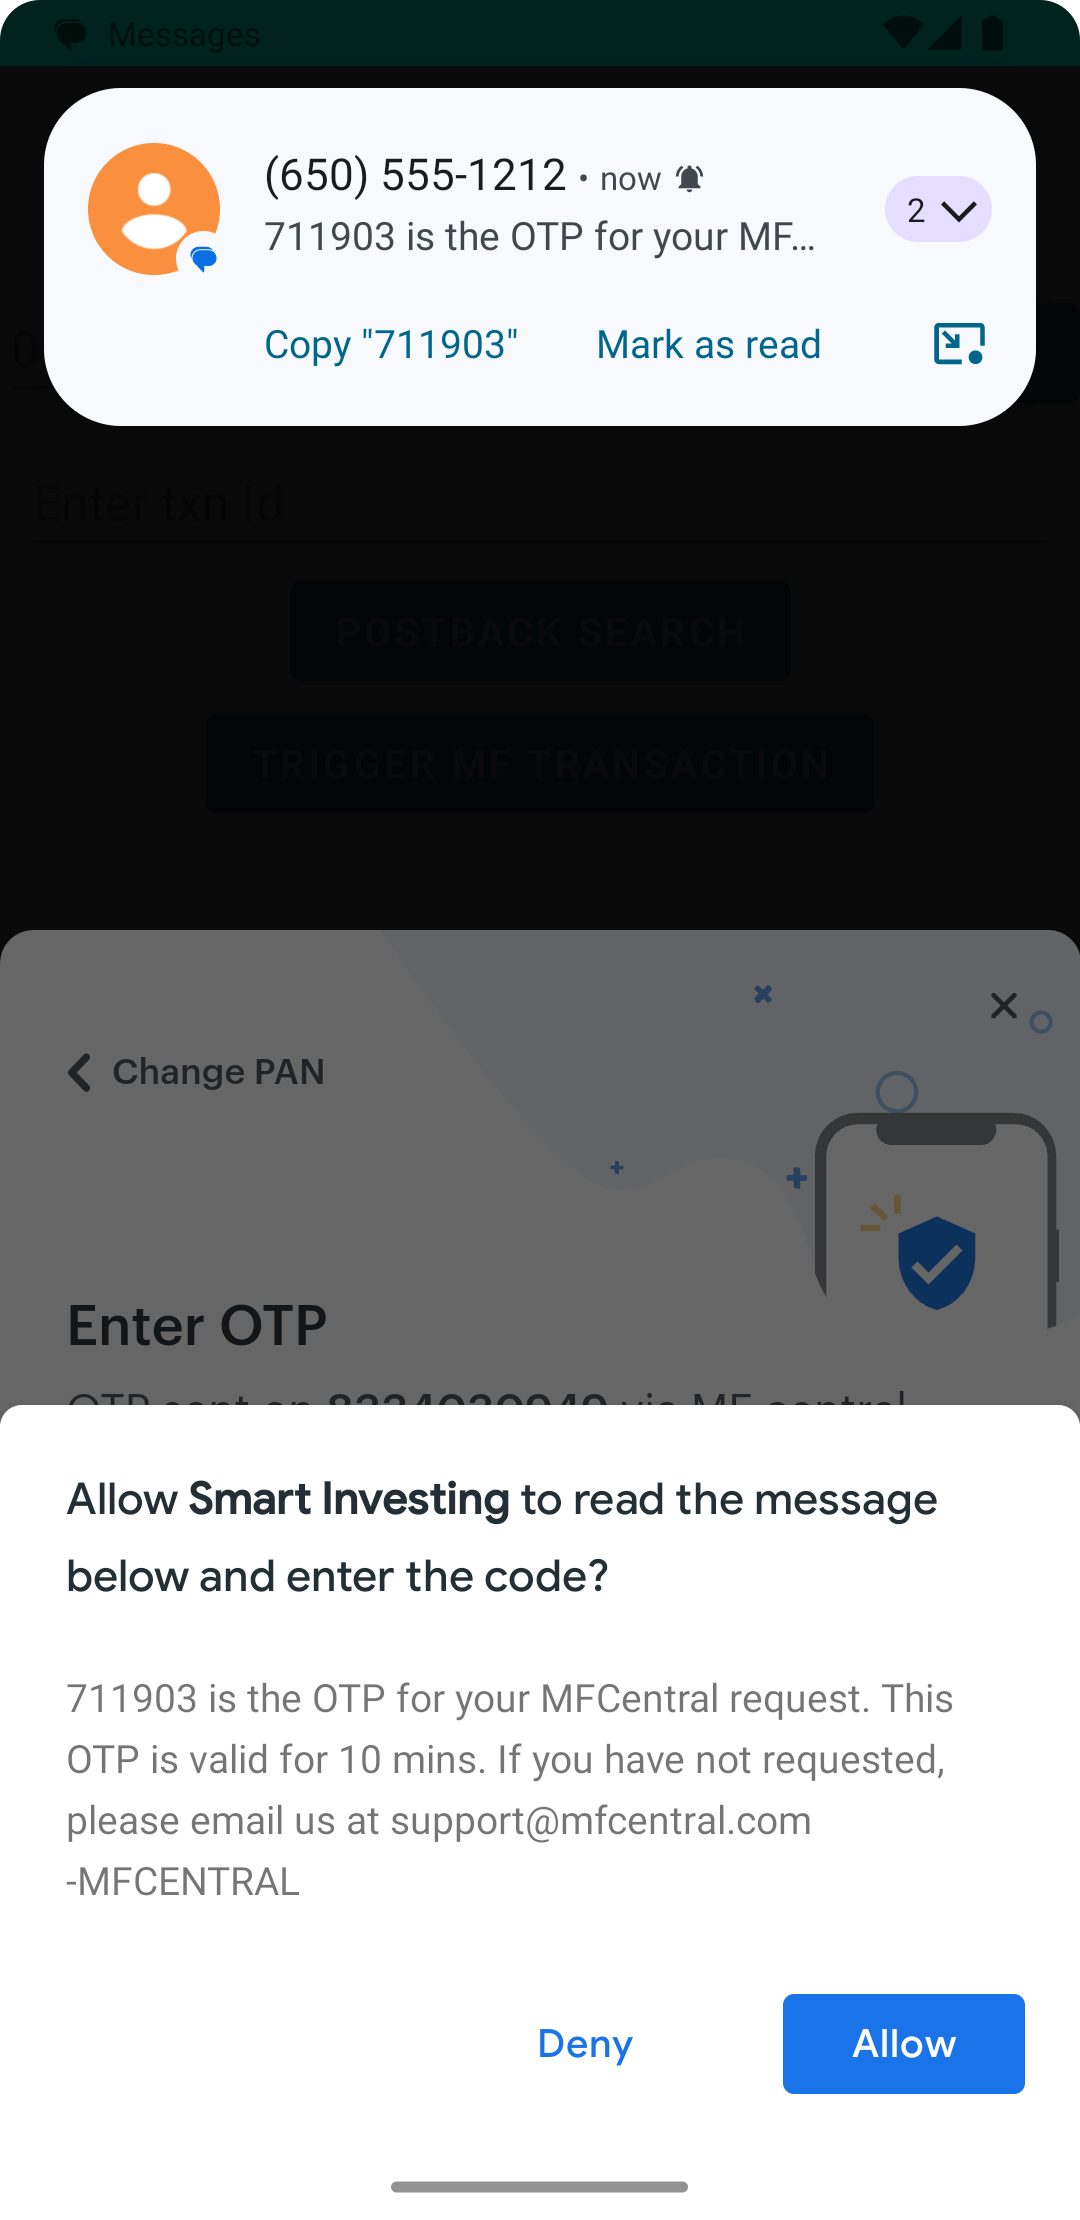 The consent modal presented to the user. It contains the entire contents of the message so the user knows exactly which message he is allowing the SDK to read.